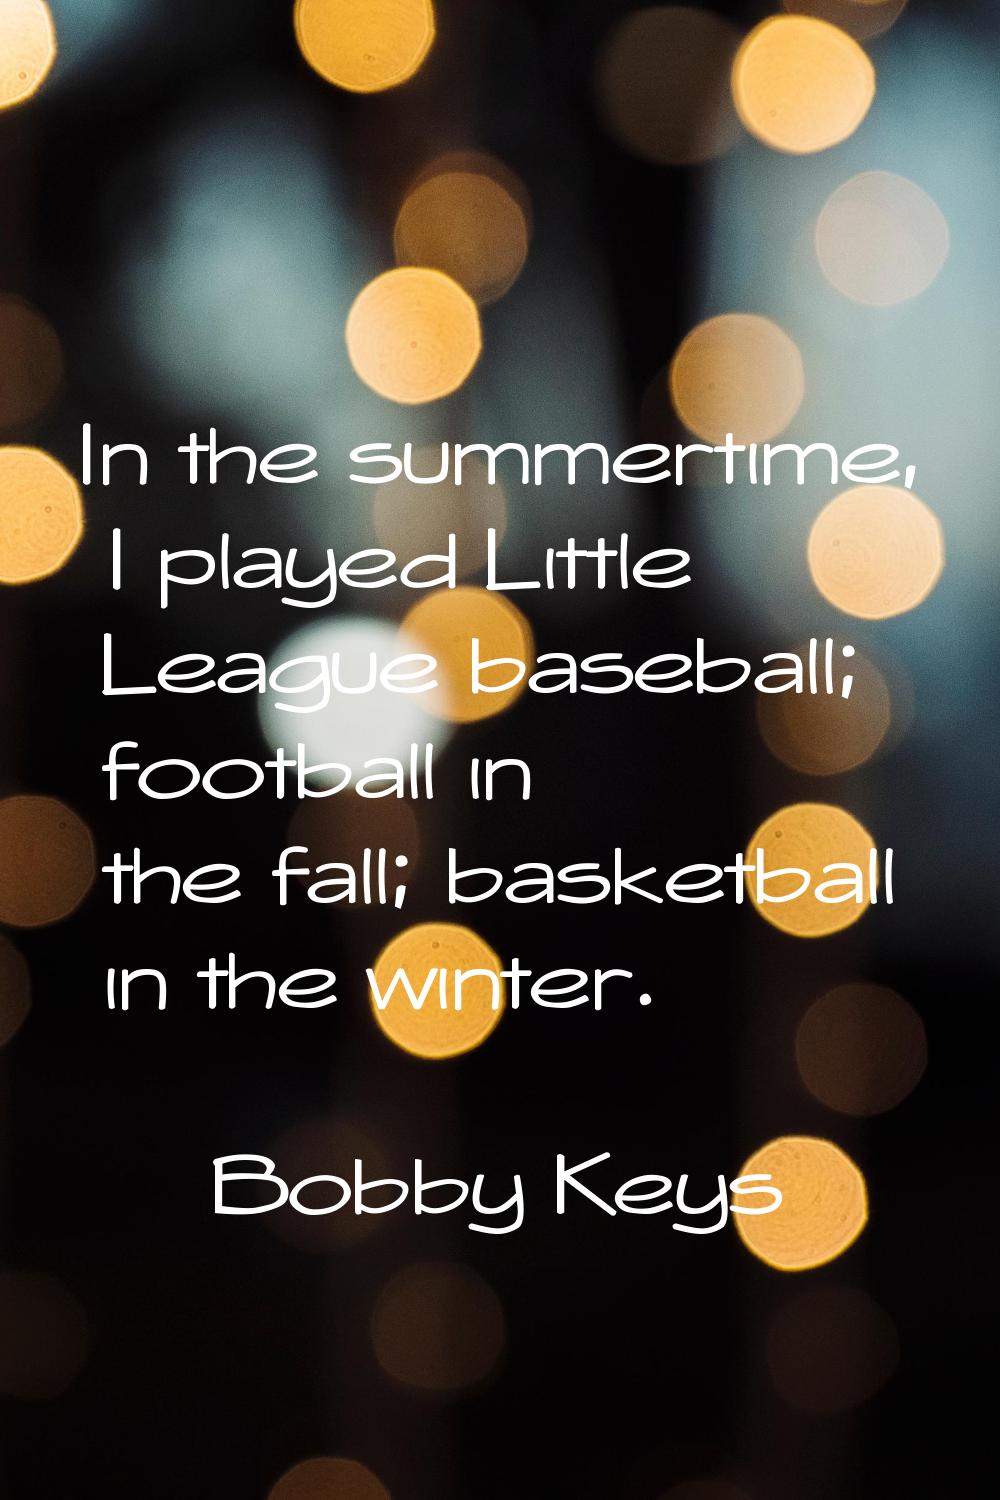 In the summertime, I played Little League baseball; football in the fall; basketball in the winter.